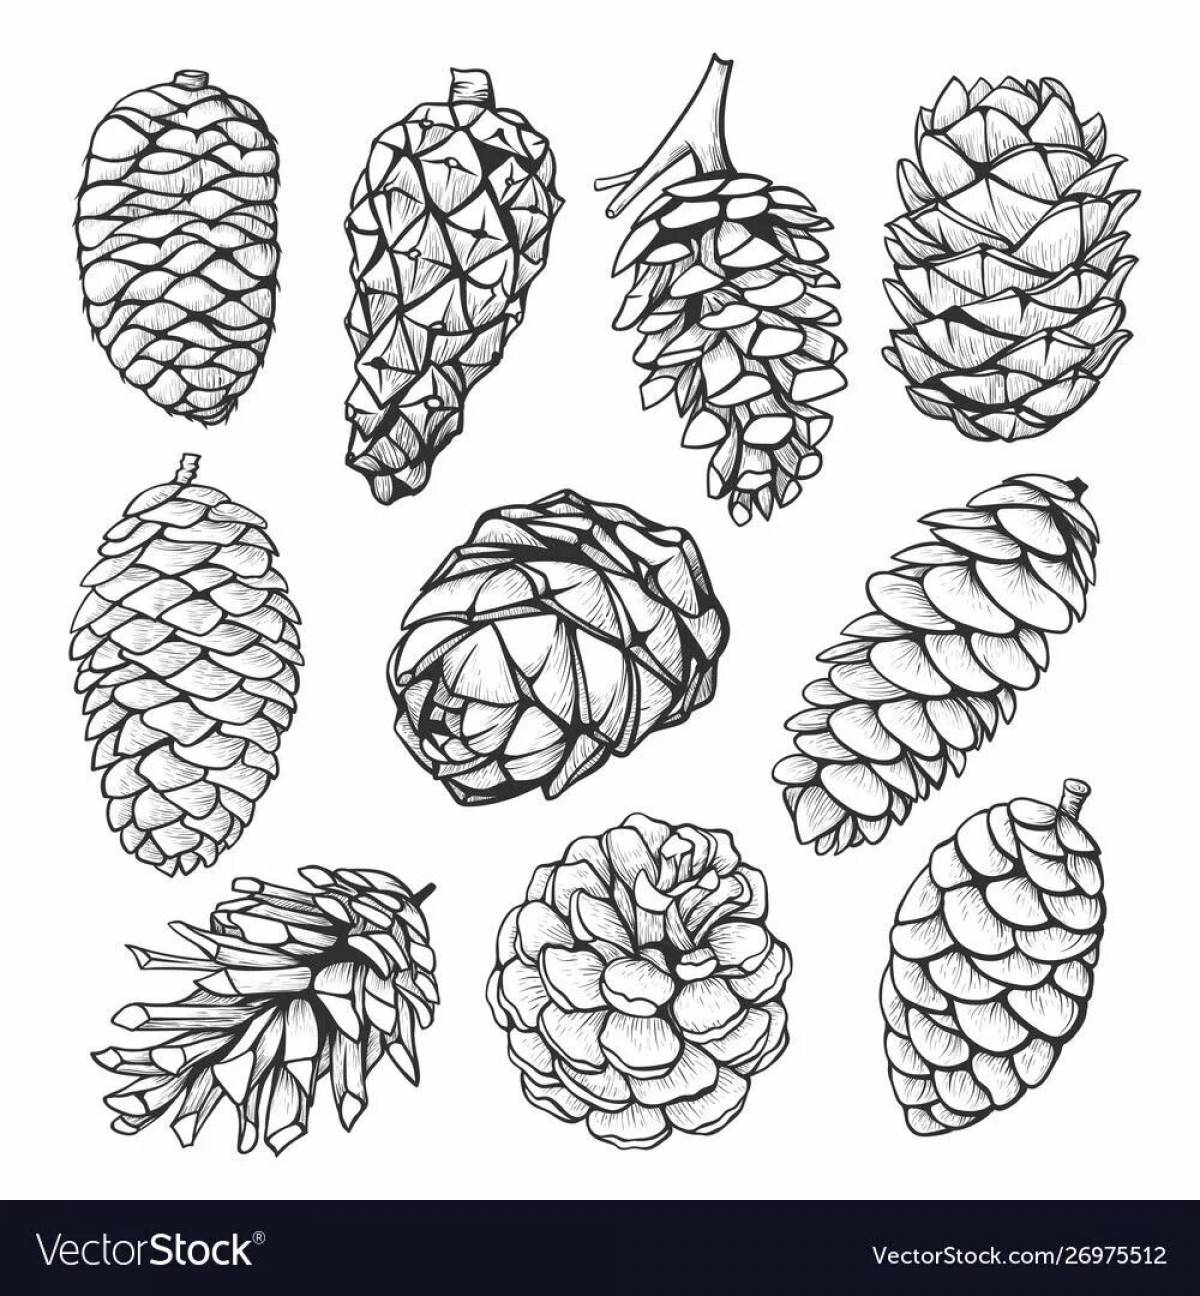 Spruce cone glossy coloring book